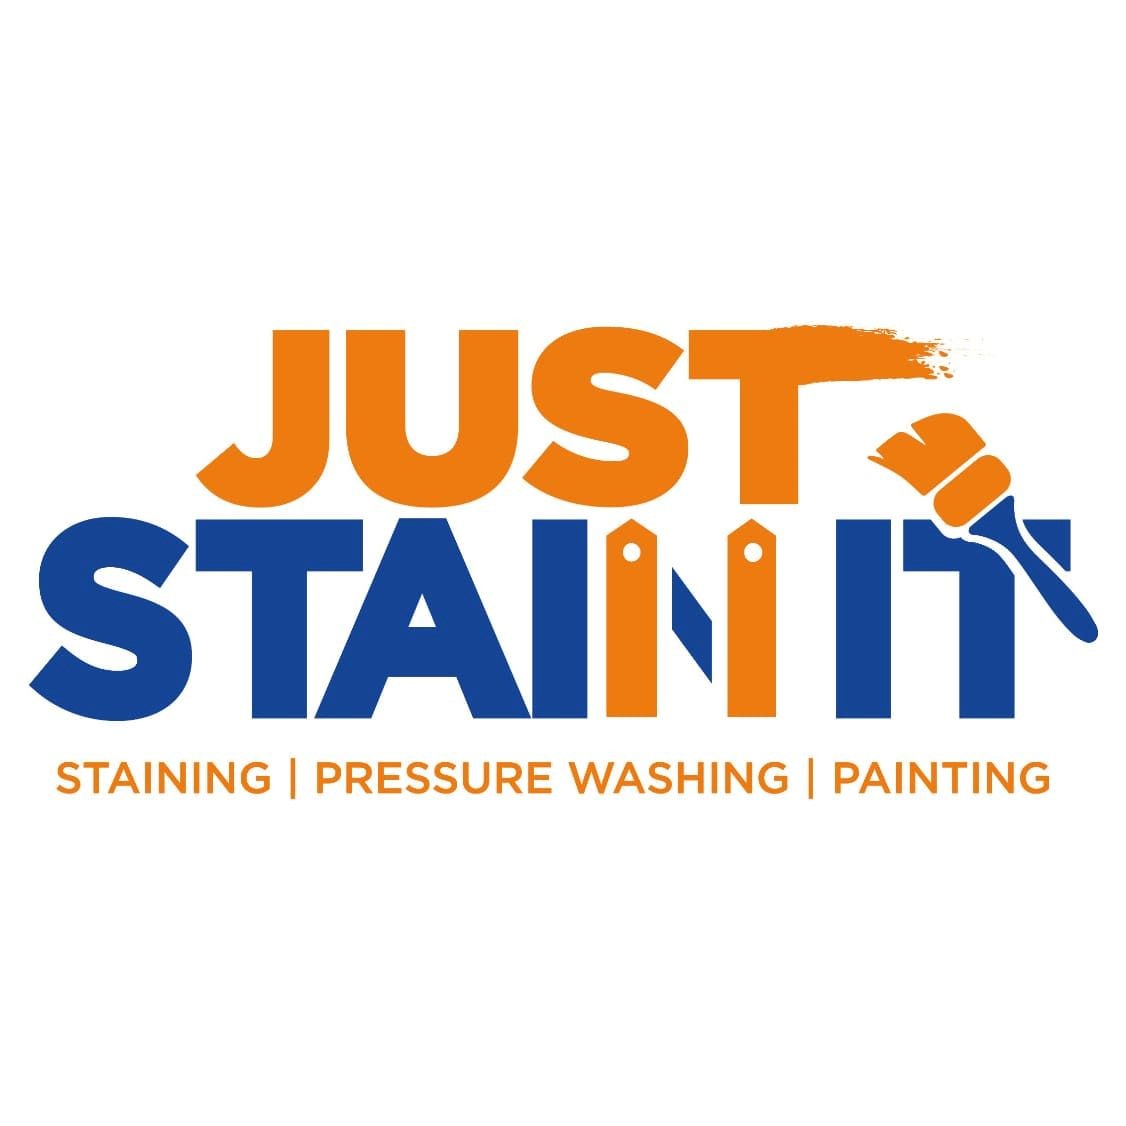 Just Stain It 